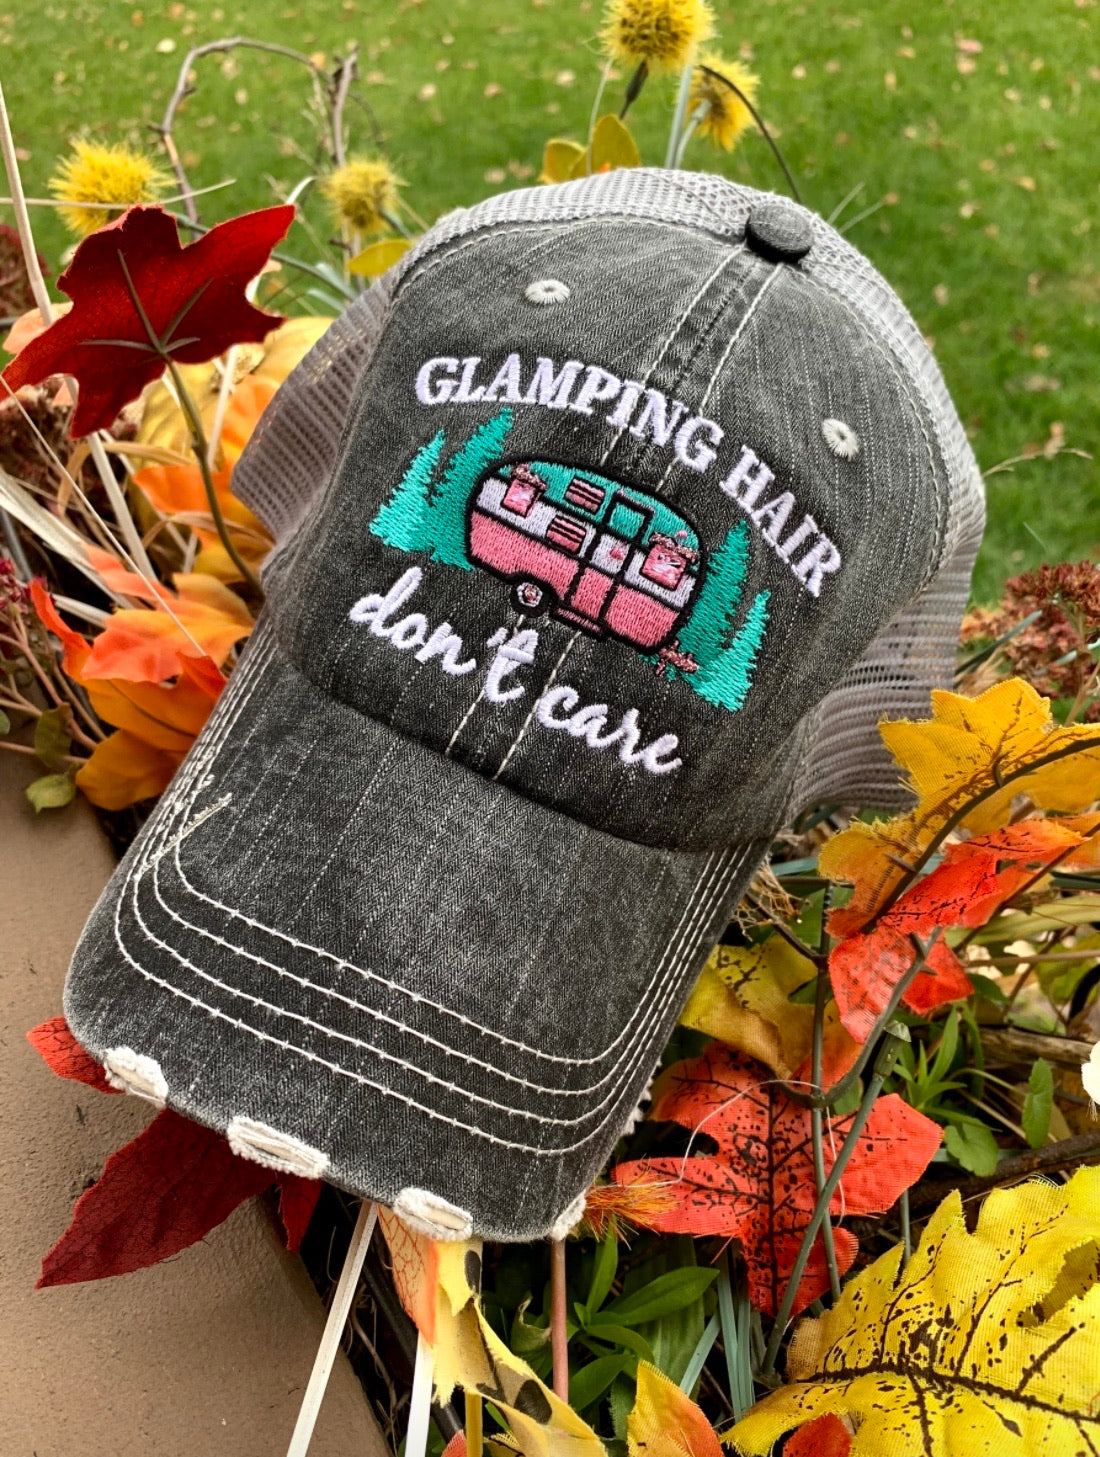 Hats or Tanks { I'm A Happy Camper } { Camping Hair Don’t Care } { Camping Life } { Glamping Hair Don’t Care } Embroidered Distressed Gray unisex